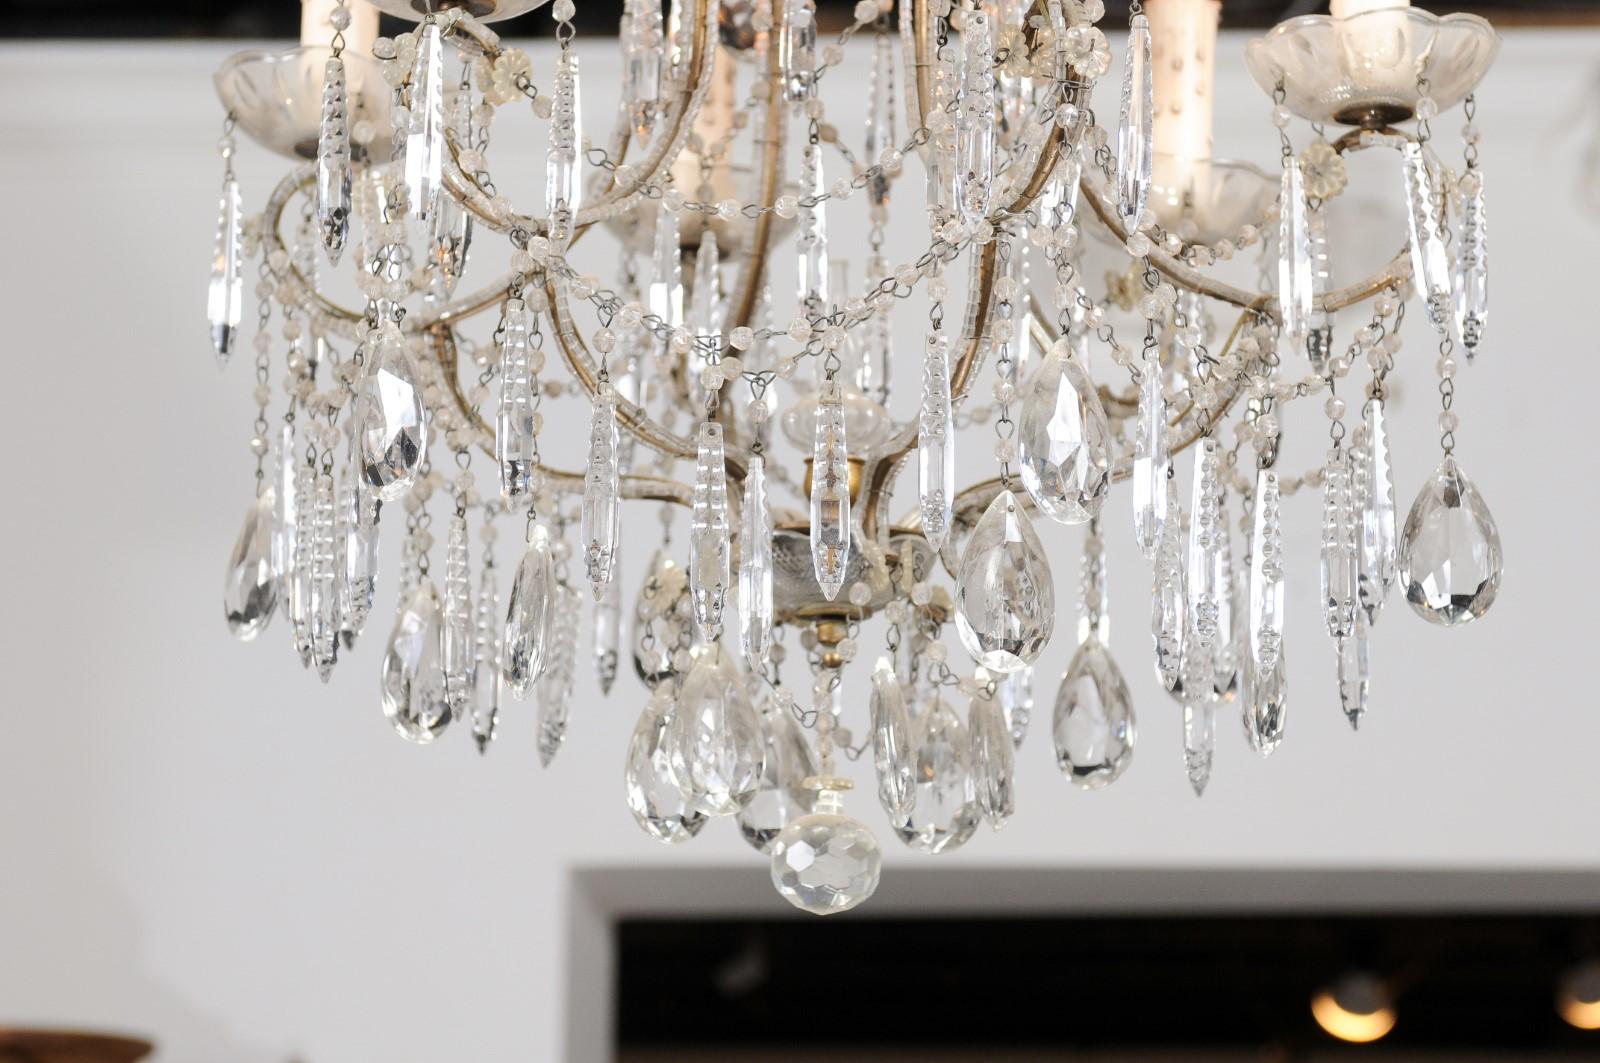 Italian 19th Century Six-Light Chandelier with Beaded Arms and Spear Crystals For Sale 7